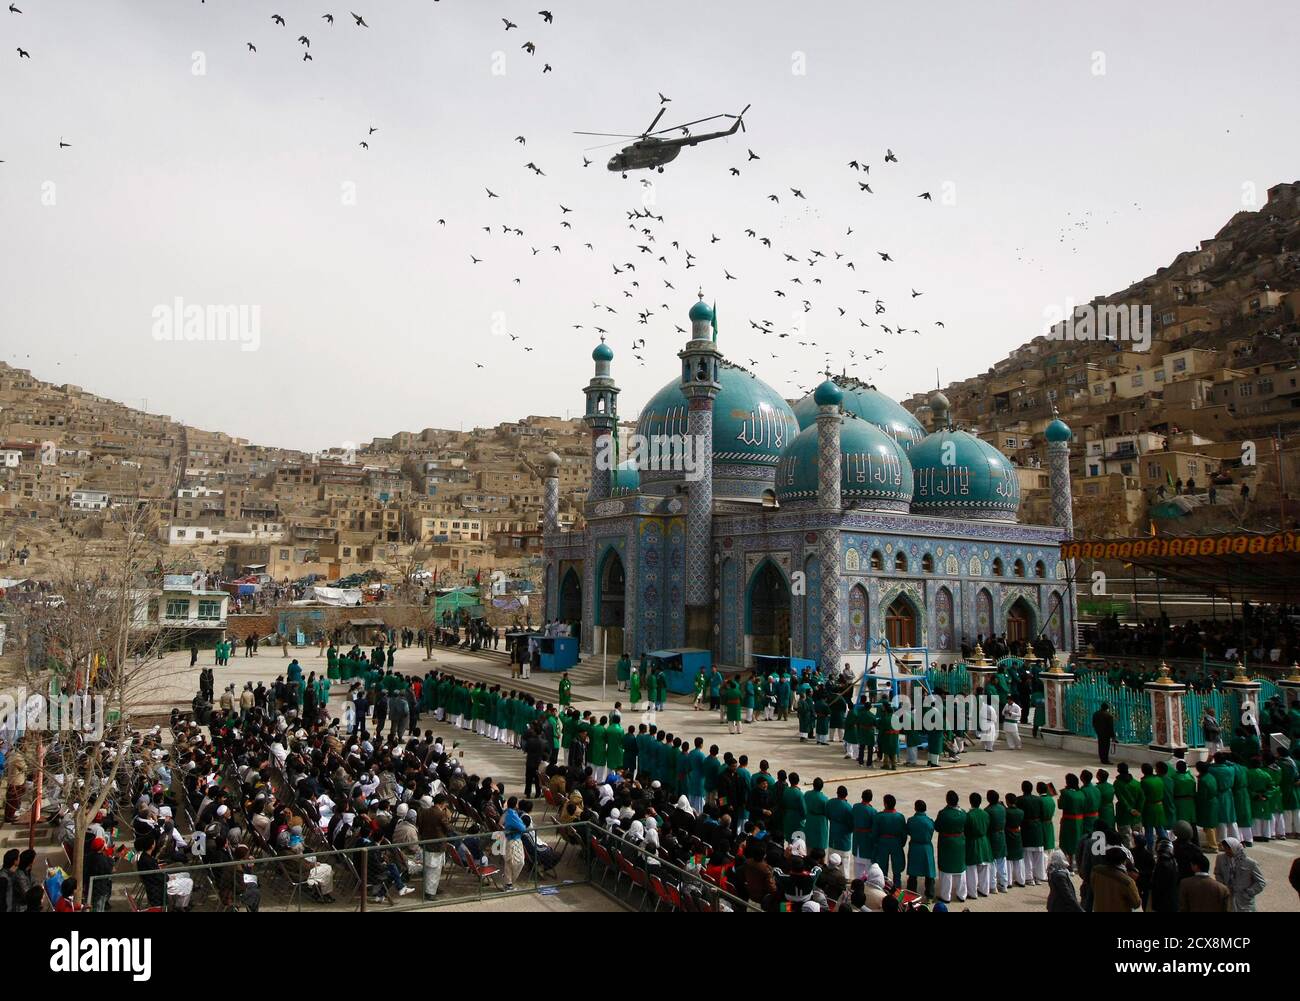 An Afghan police helicopter flies over Hazrat Ali (Kart-i-Sakhi) shrine where Afghans celebrate the Afghan New Year (Nawroz) in Kabul March 20, 2012. Afghanistan uses the Persian calendar which runs from the vernal equinox. The calendar takes as its start date the time when the Prophet Mohammad moved from Mecca to Medina in 621 AD. The current Persian year is 1391. REUTERS/Omar Sobhani (AFGHANISTAN - Tags: SOCIETY TPX IMAGES OF THE DAY)   FOR BEST QUALITY IMAGE: ALSO SEE GF2E8B30FZF01. Stock Photo